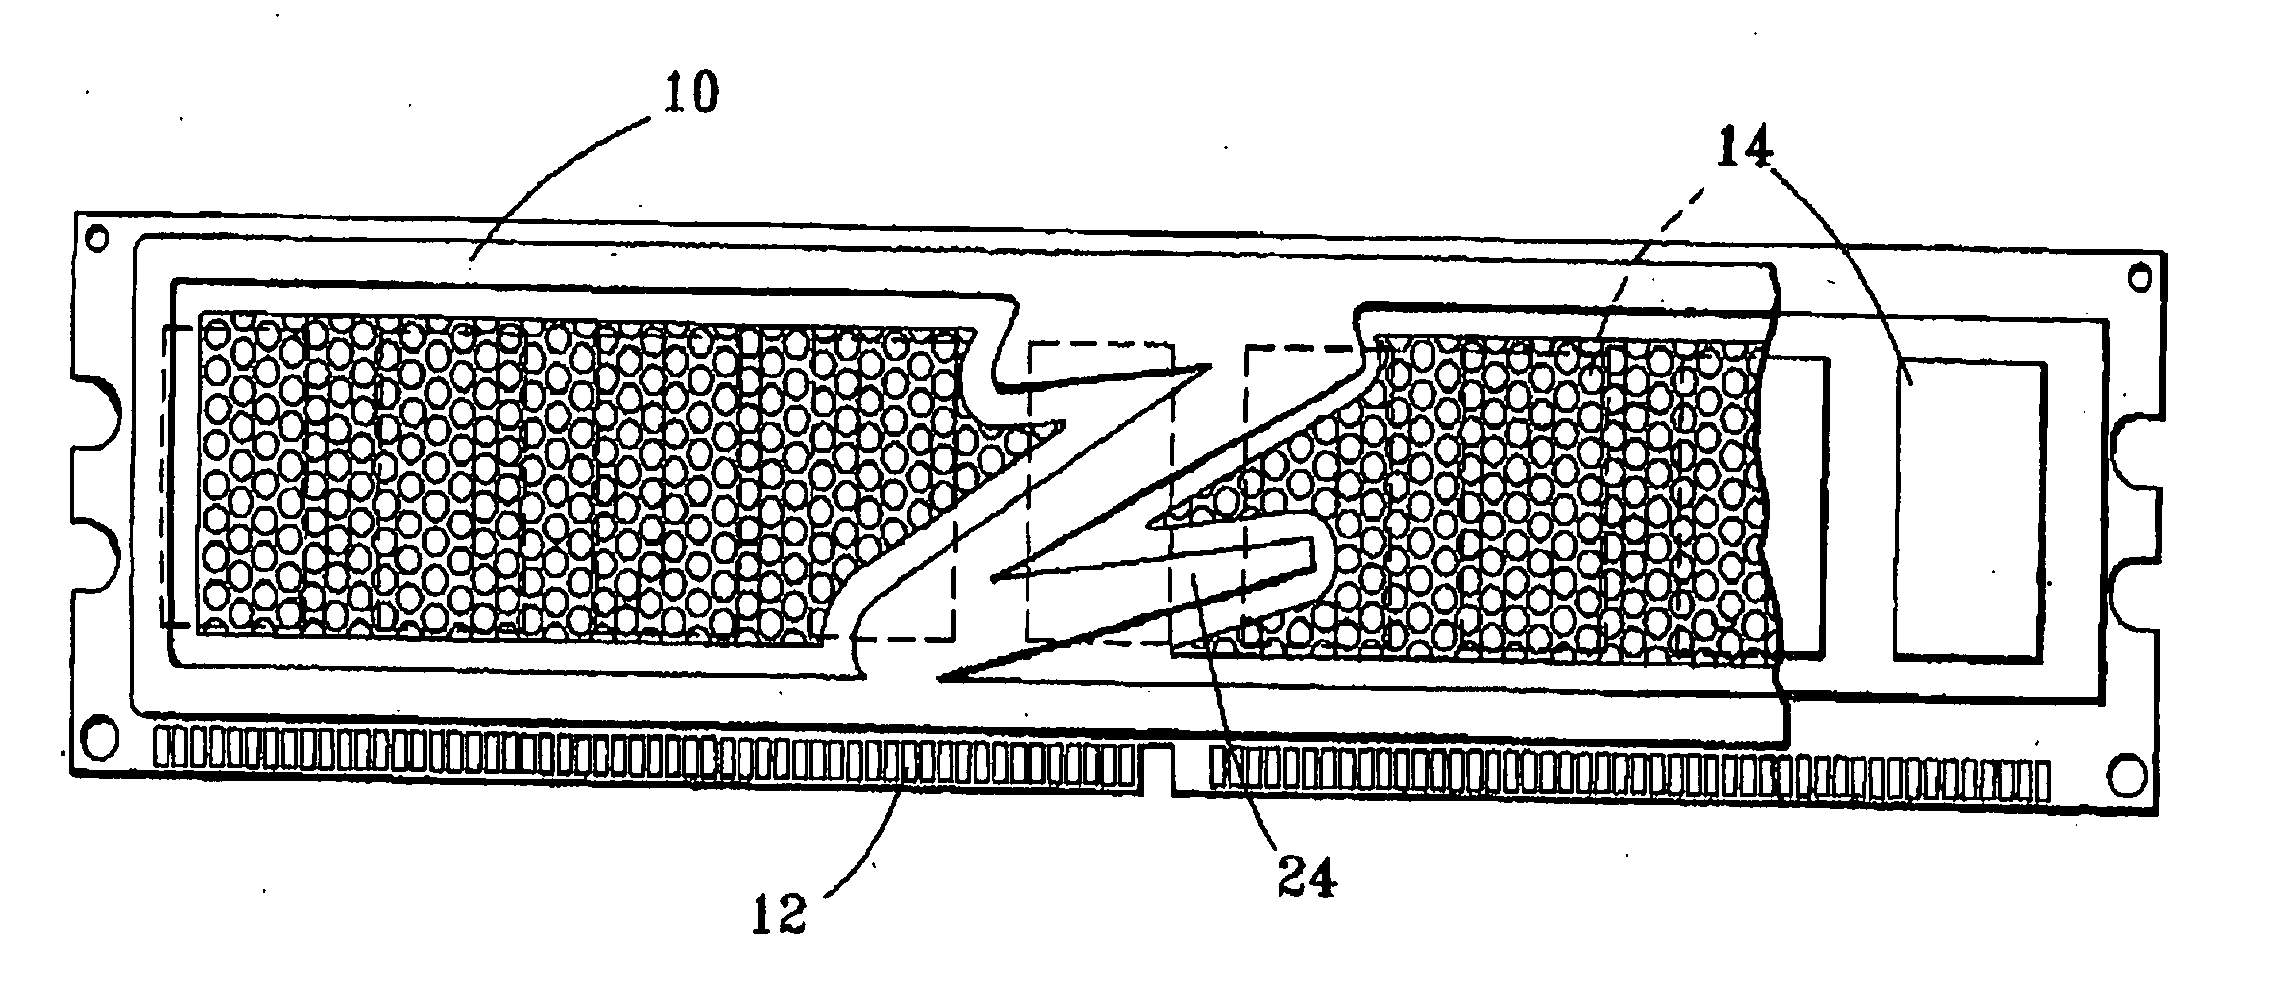 Method and apparatus for thermal management of computer memory modules